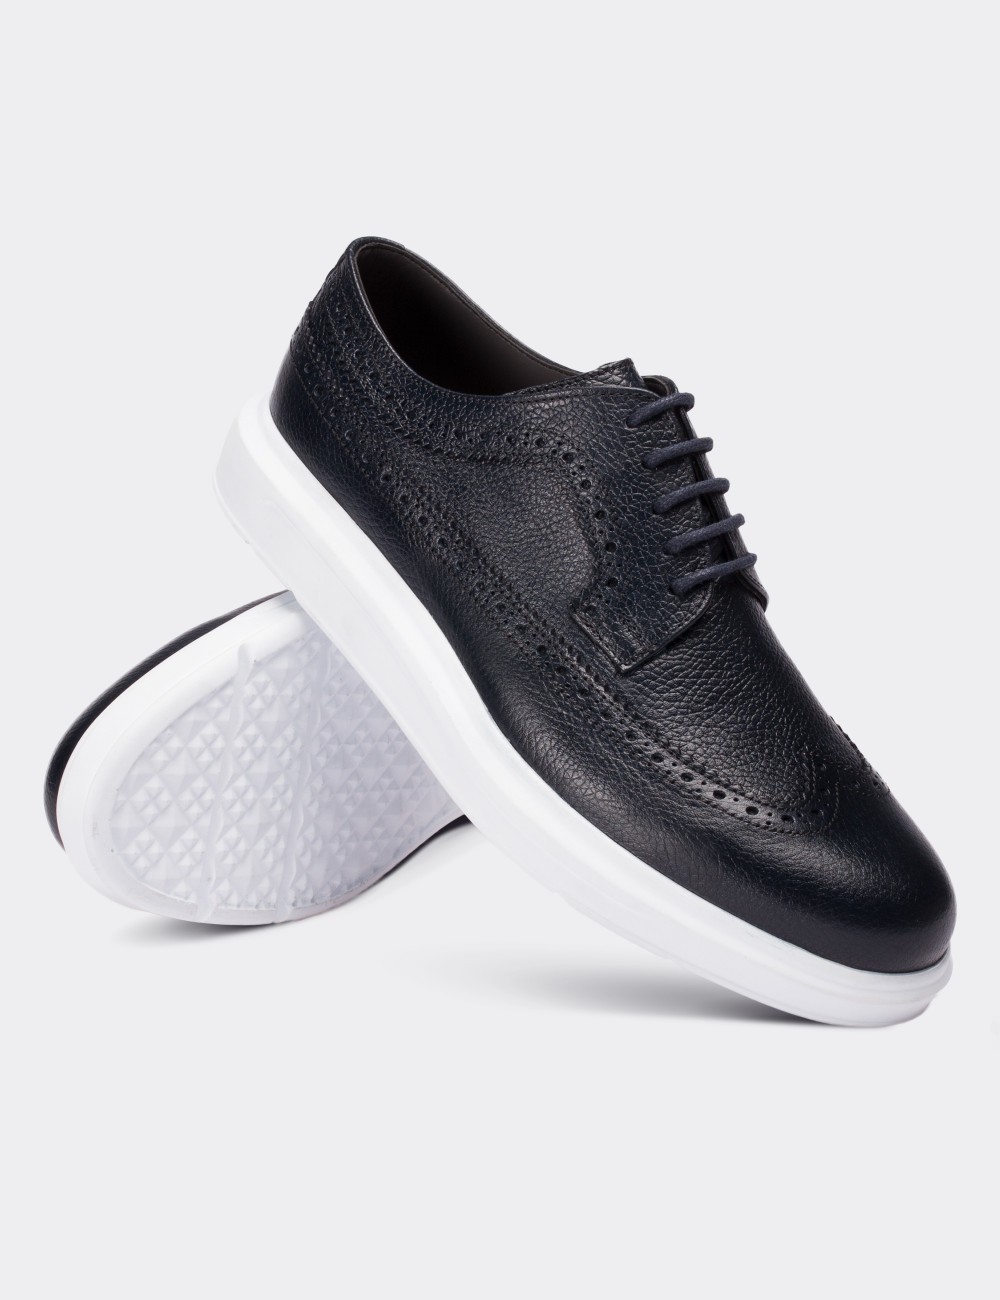 Navy  Leather Lace-up Shoes - 01293MLCVP04